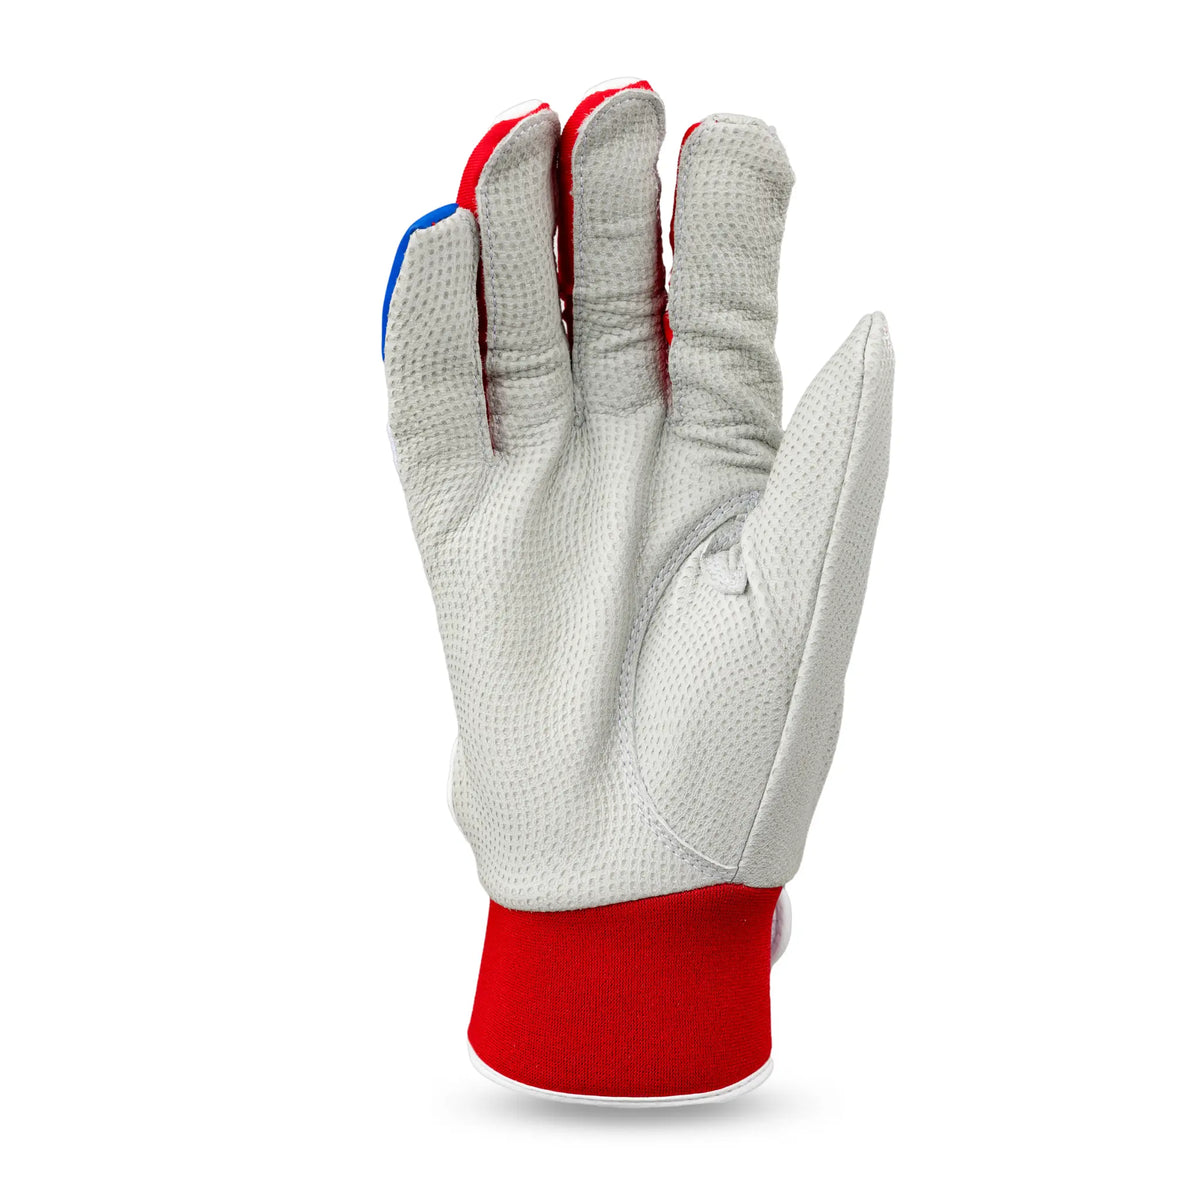 Palm view of premium Tater Baseball batting gloves, featuring durable white leather with red stitching and a blue accent, designed for a comfortable grip and long-lasting performance.